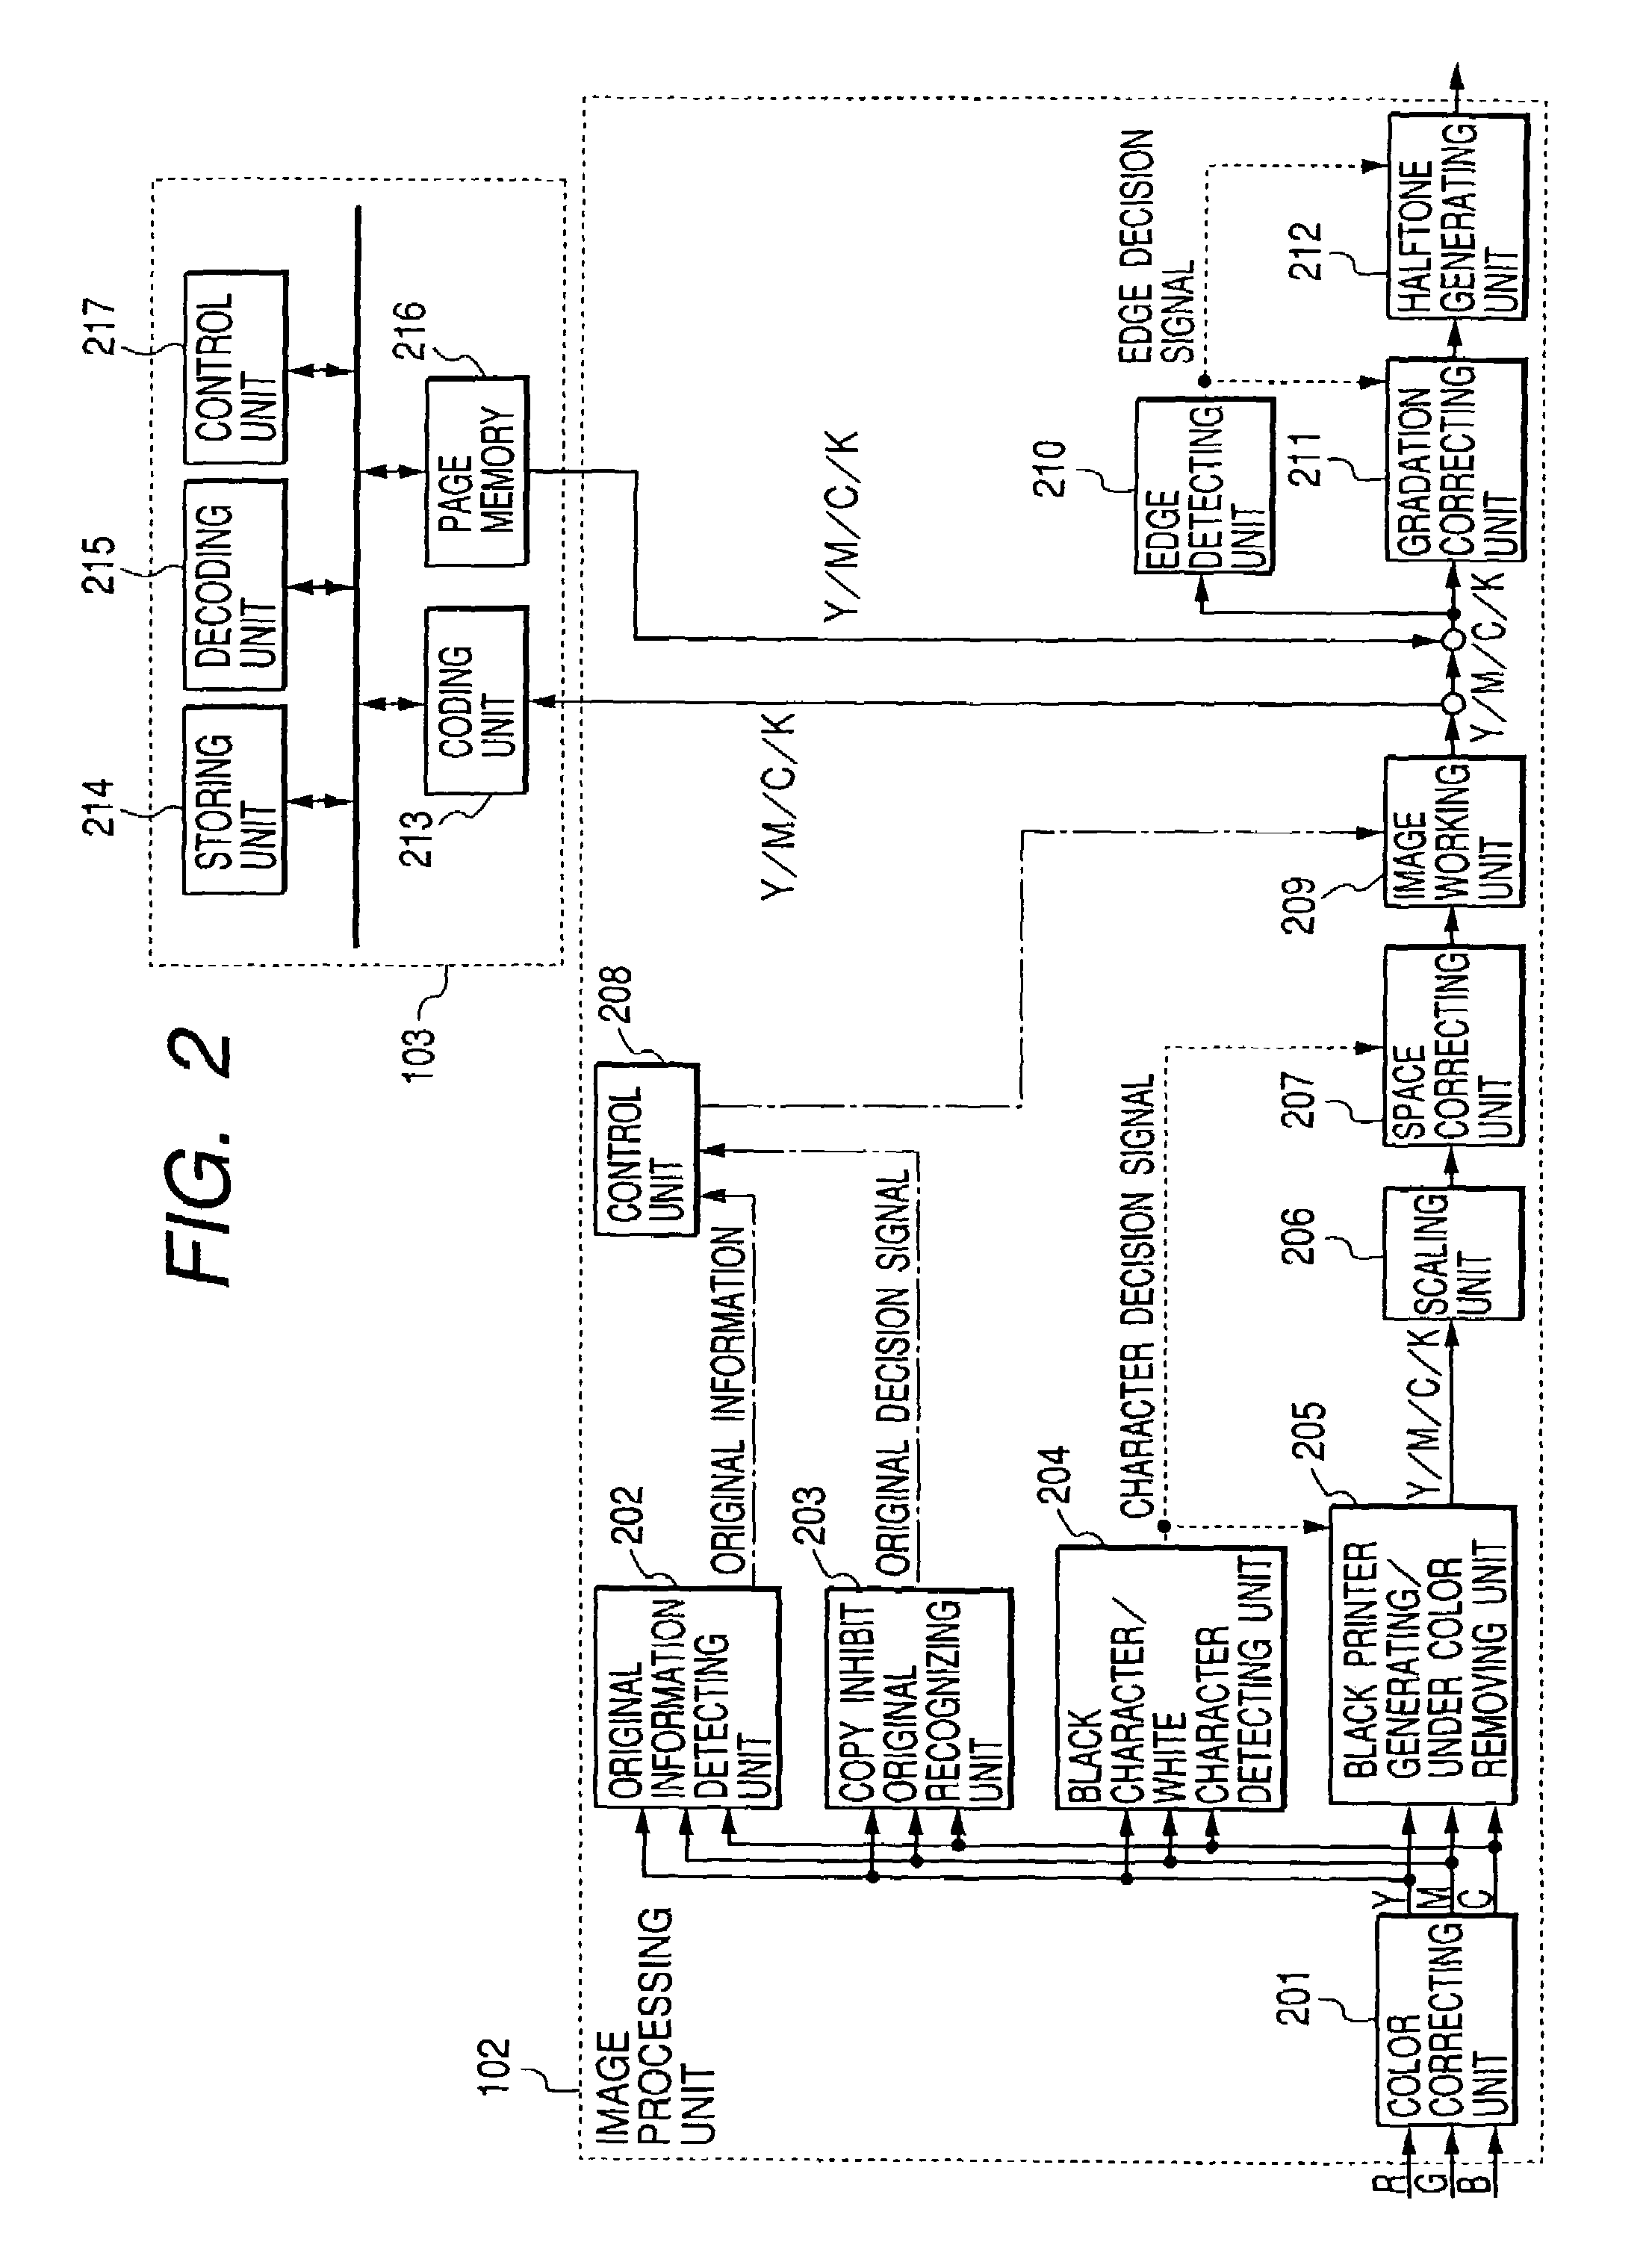 Image processing system, image processing method, and image input system